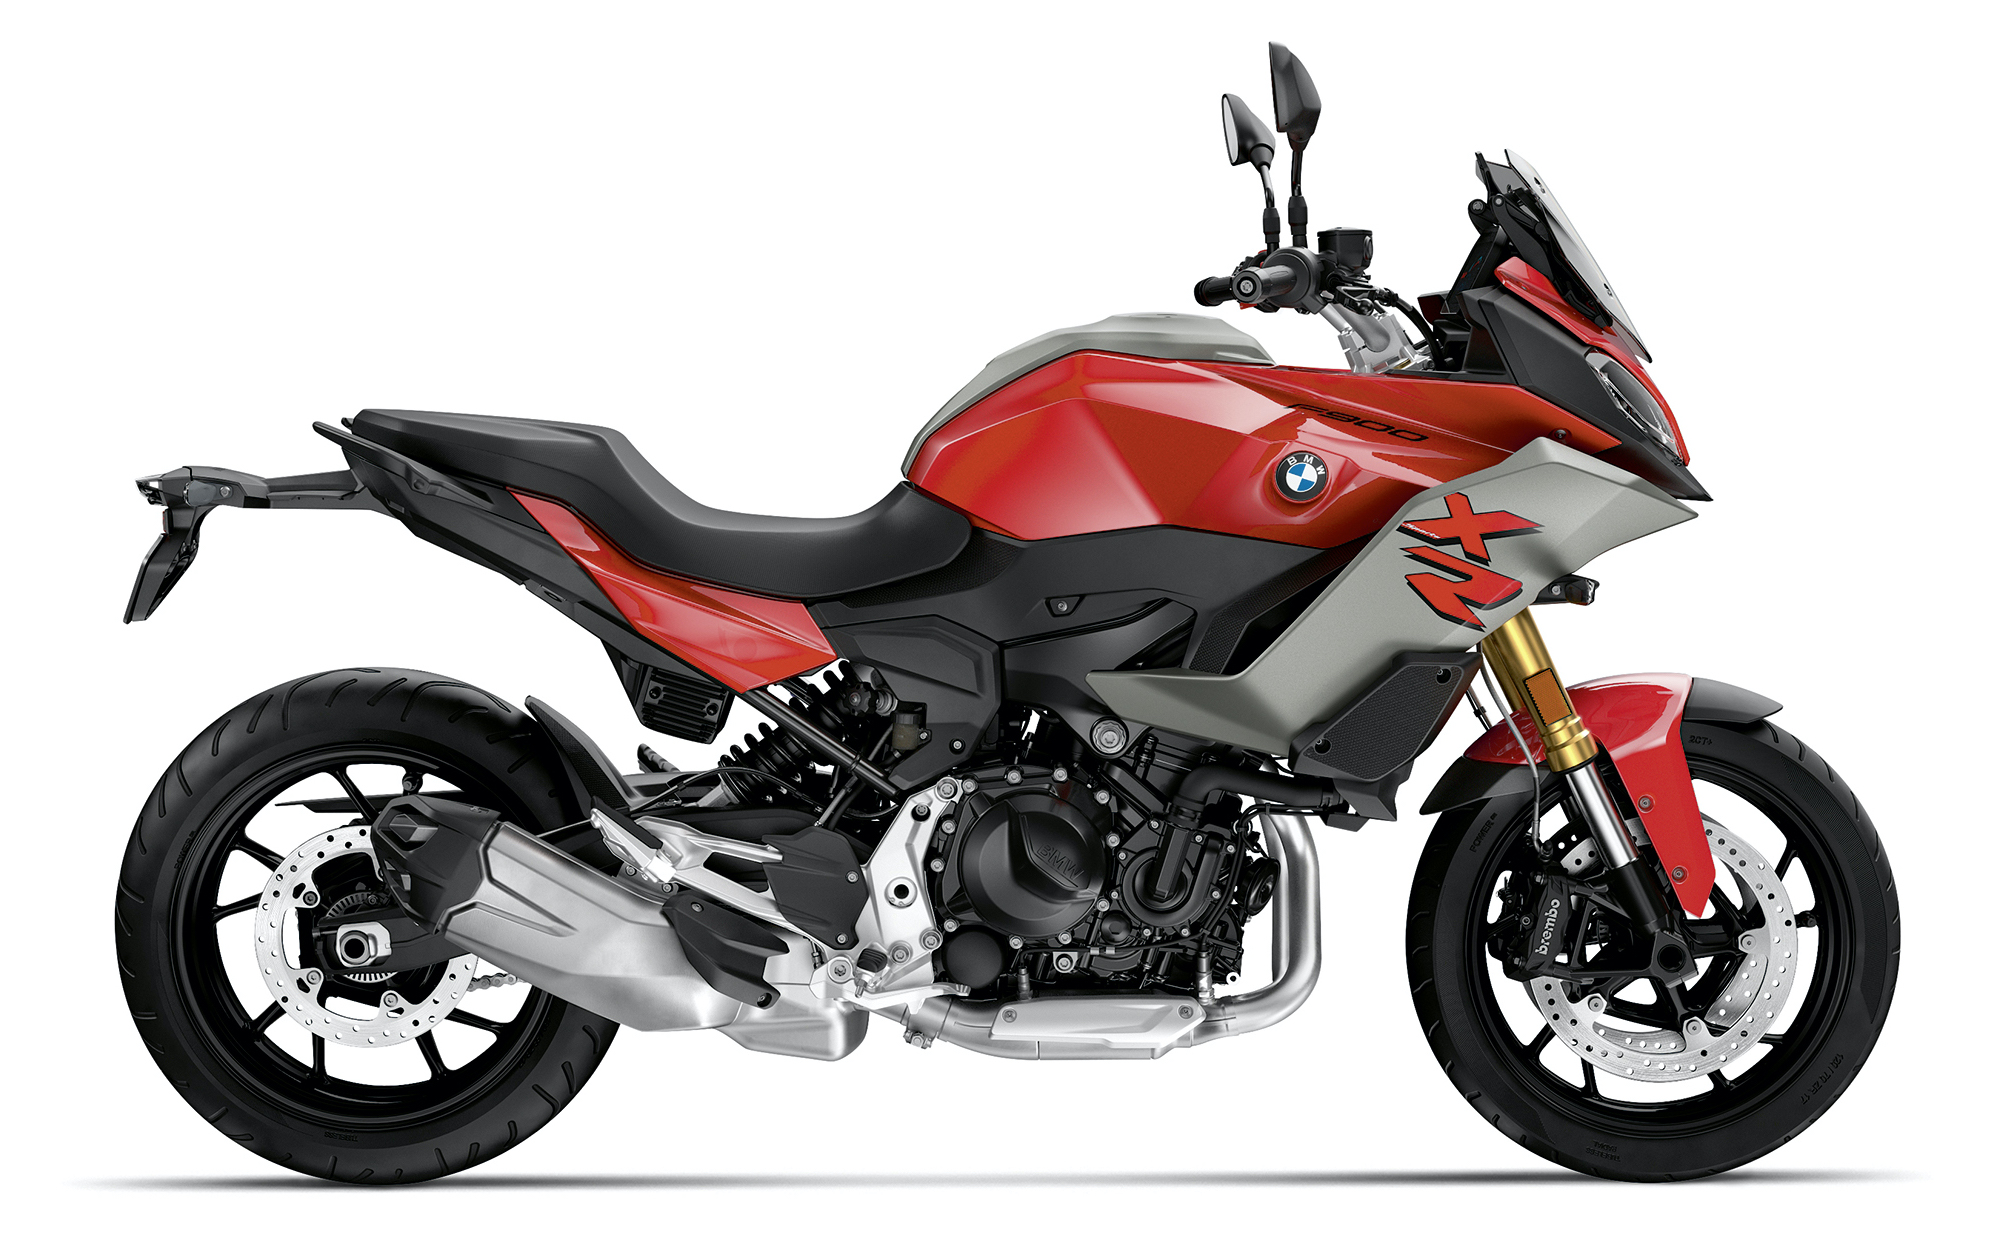 The 2021 BMW Motorcycle Lineup + Our Take On Each Model | webBikeWorld